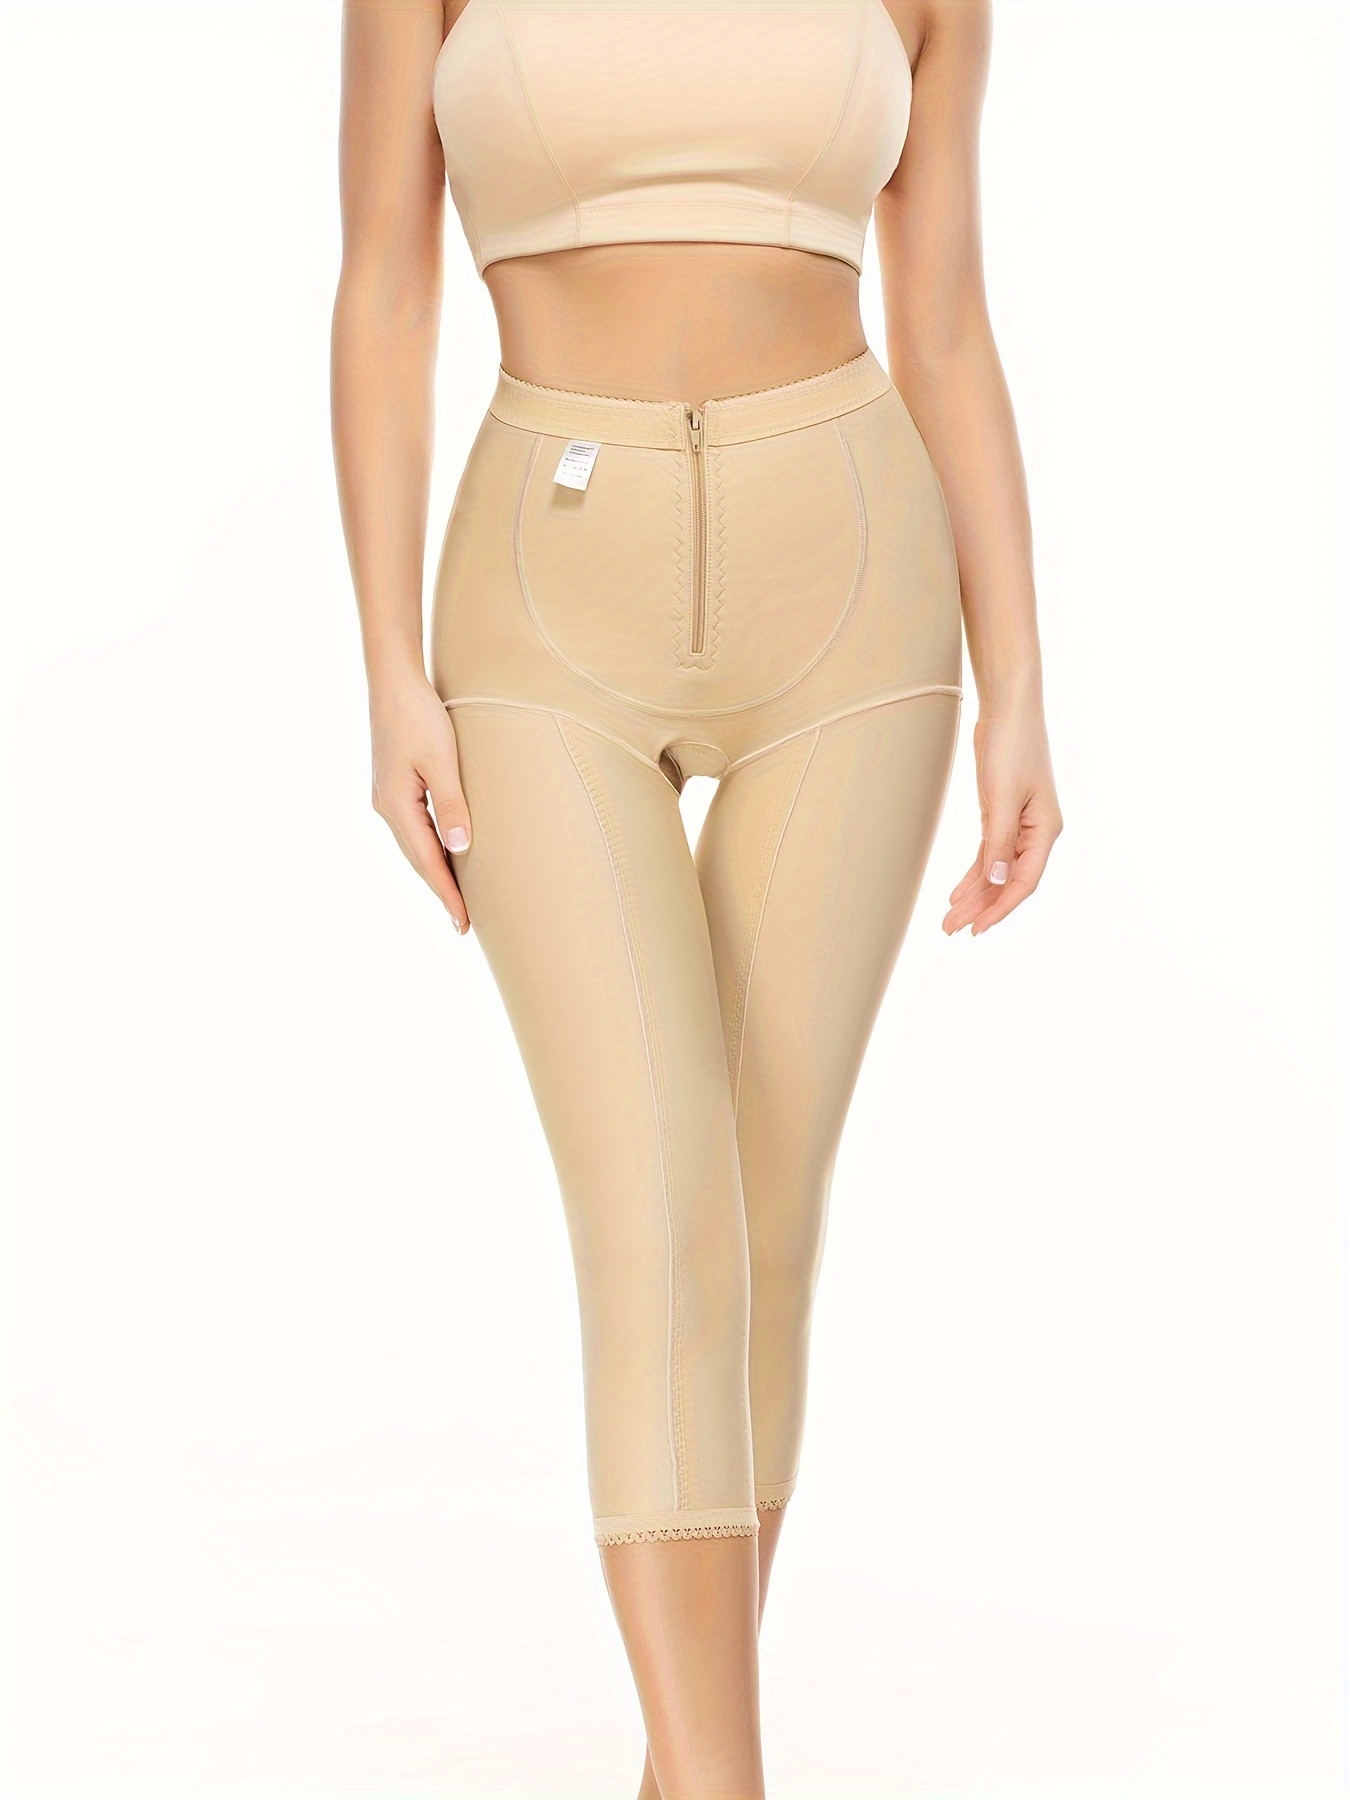 Capri style girdle with high waist and high compression